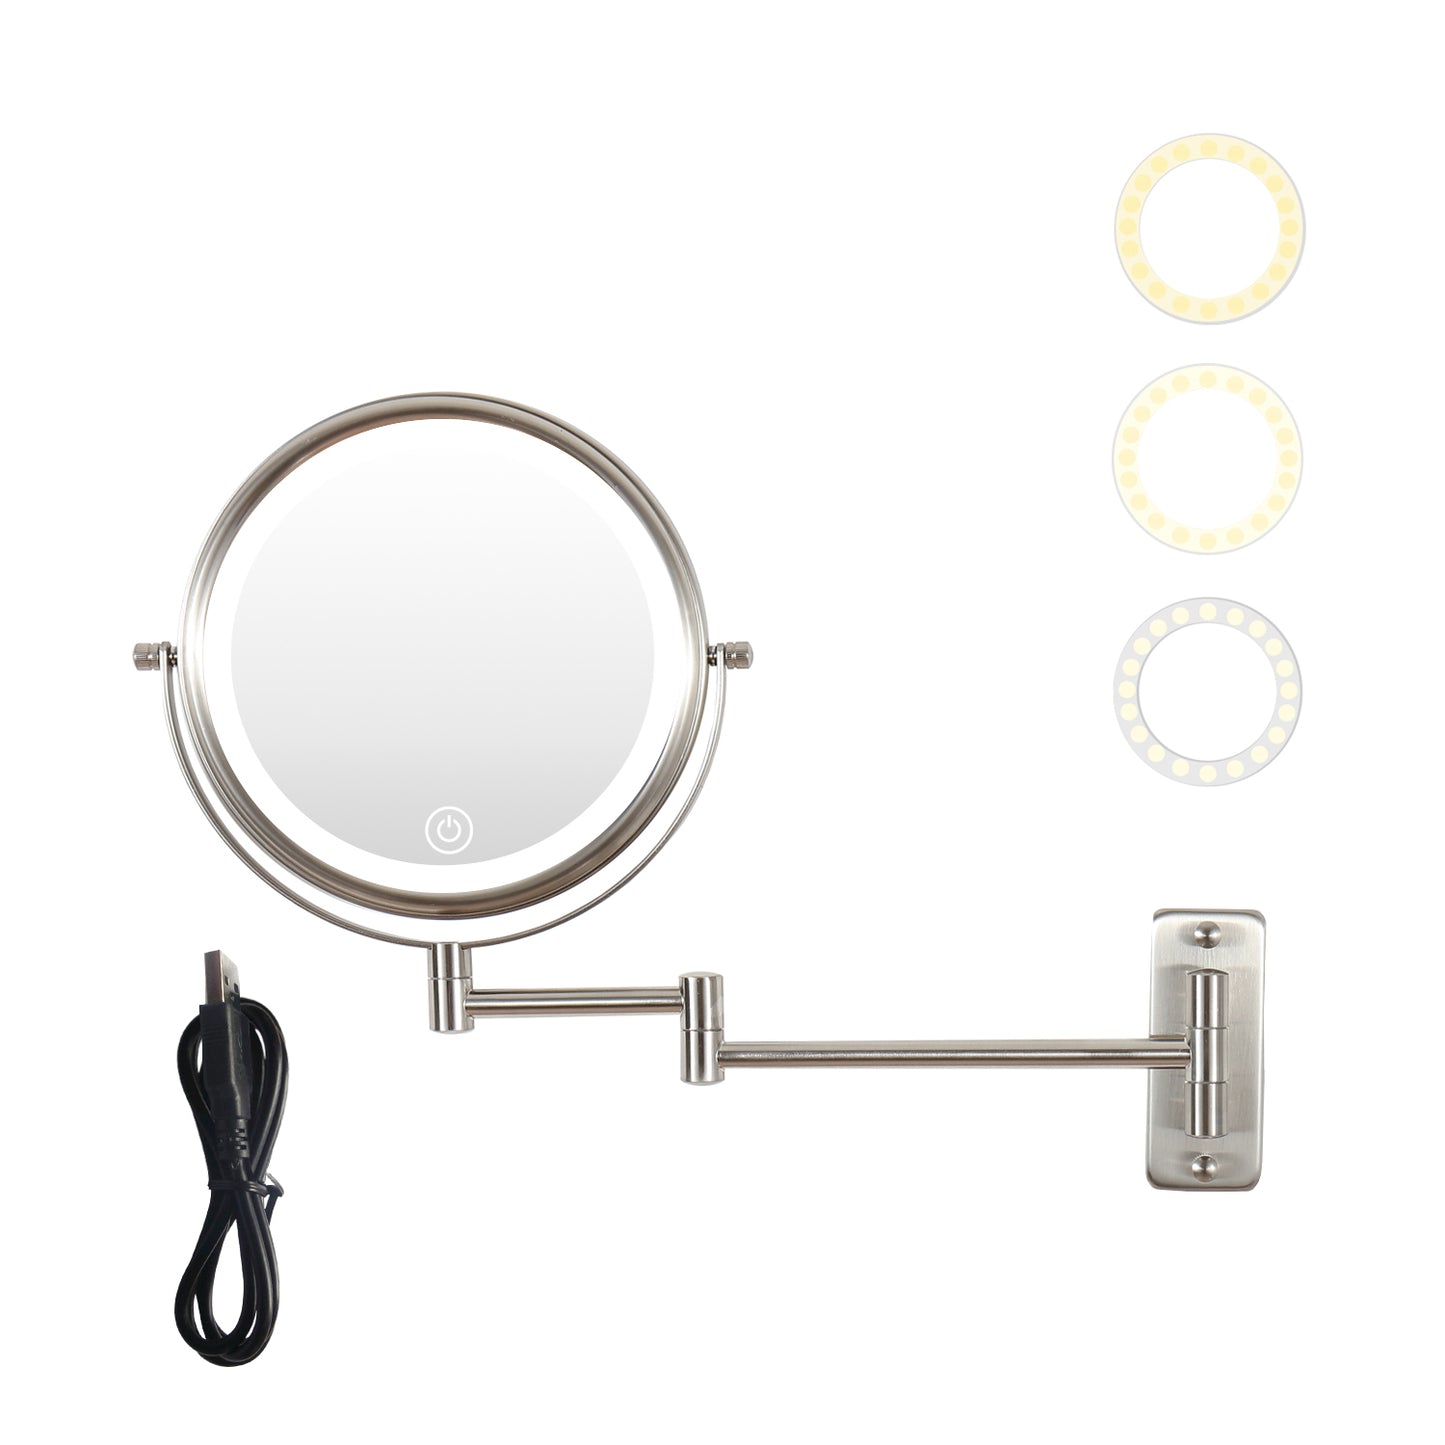 8-inch Wall Mounted Makeup Vanity Mirror, 3 colors Led lights, 1X/10X Magnification Mirror, 360° Swivel with Extension Arm (Brushed Nickel)